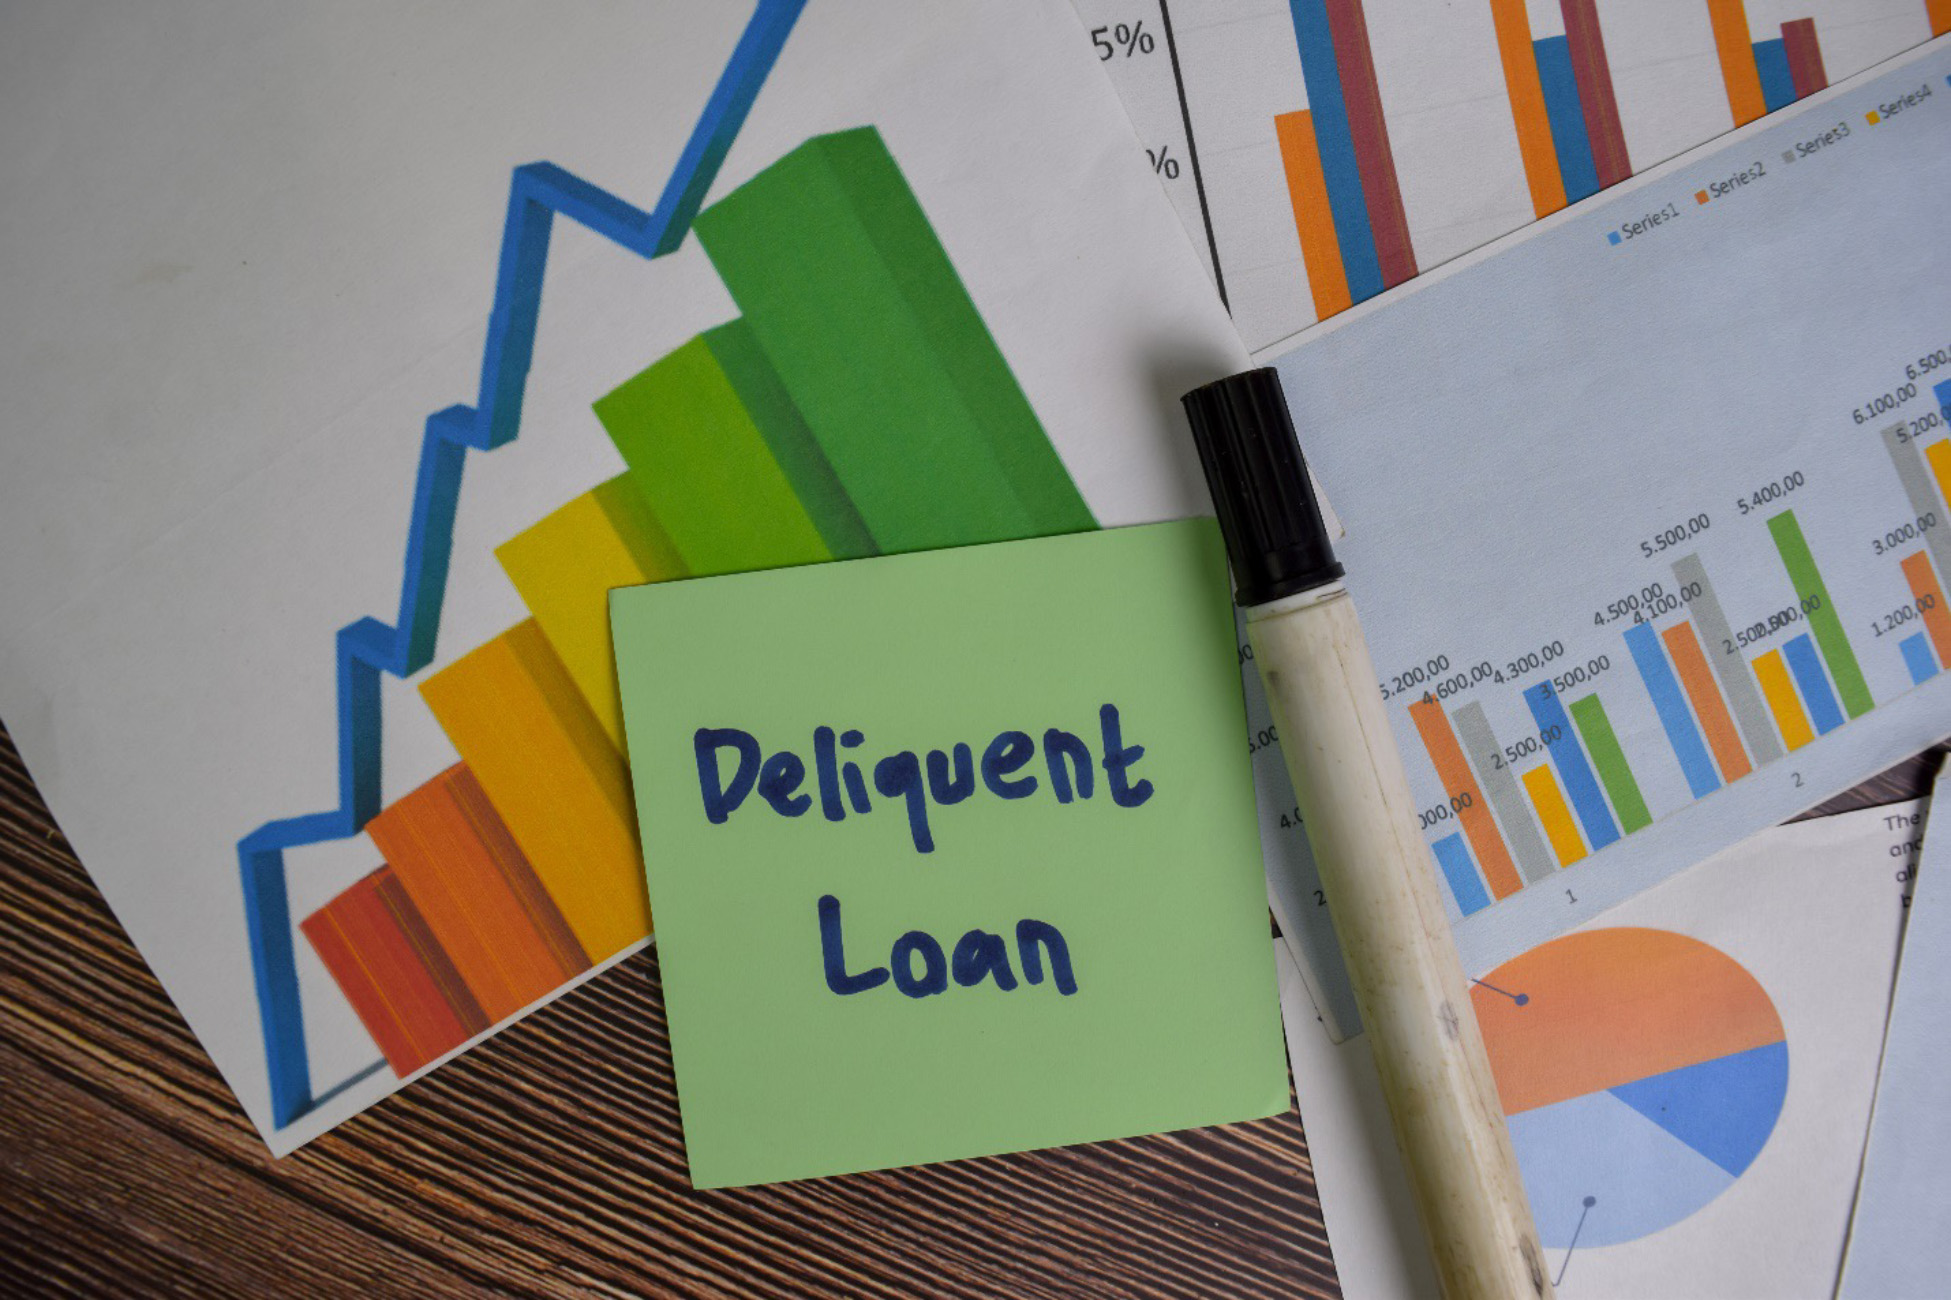 Why Rising Auto Loan Delinquencies Call For A Vigilant Yet Empathetic Approach By Lenders